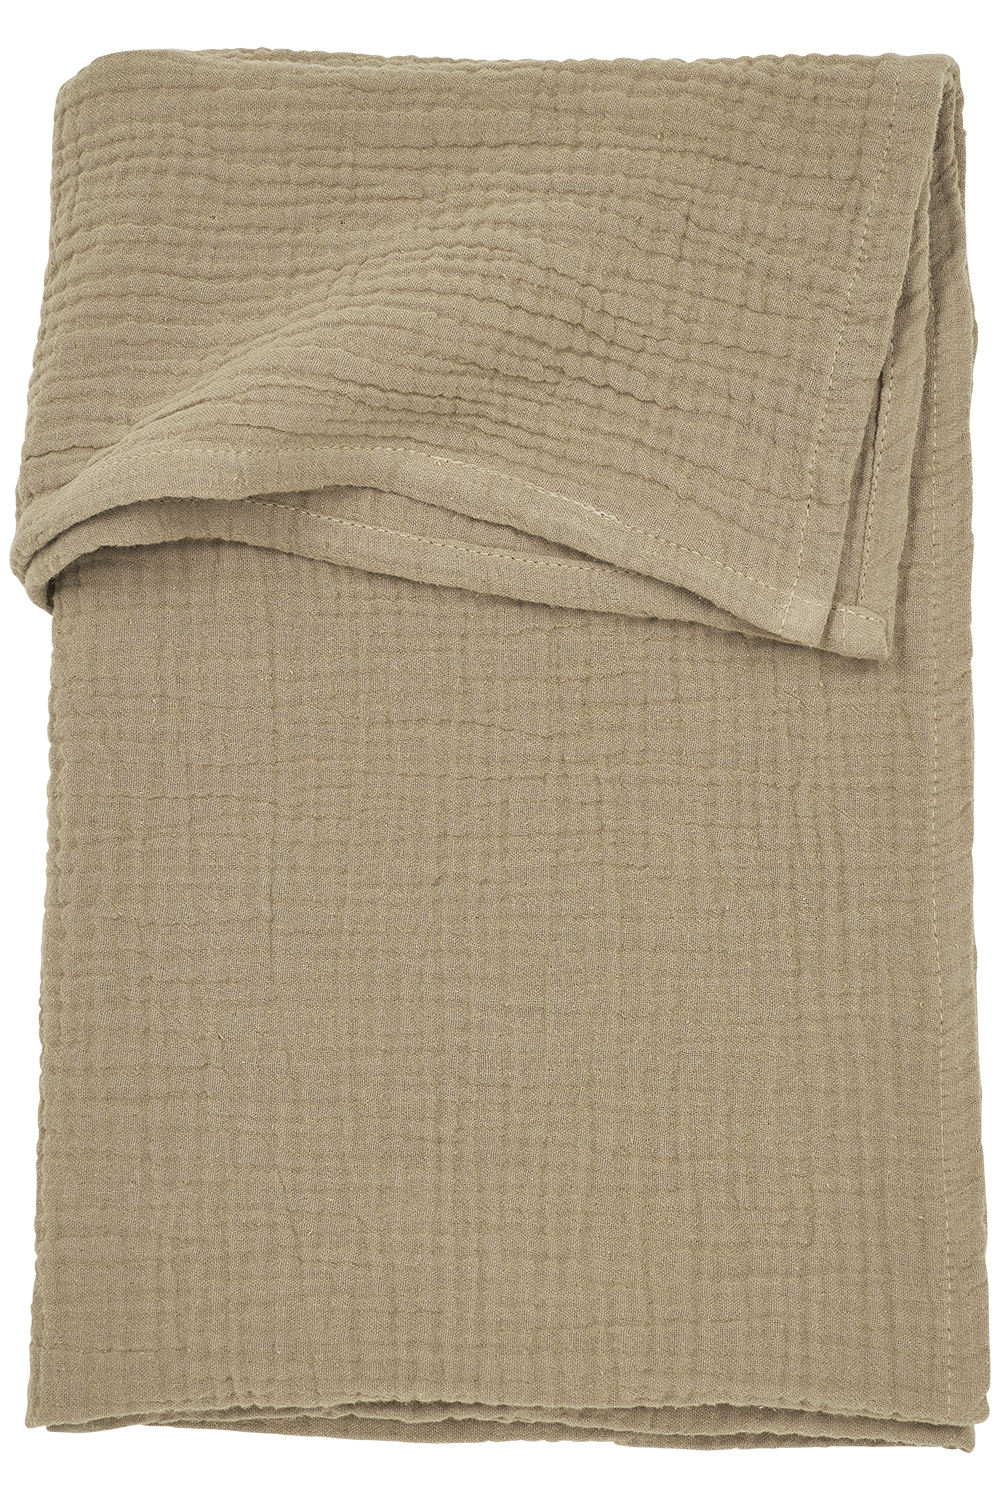 Cot bed sheet pre-washed muslin Uni - taupe - 100x150cm